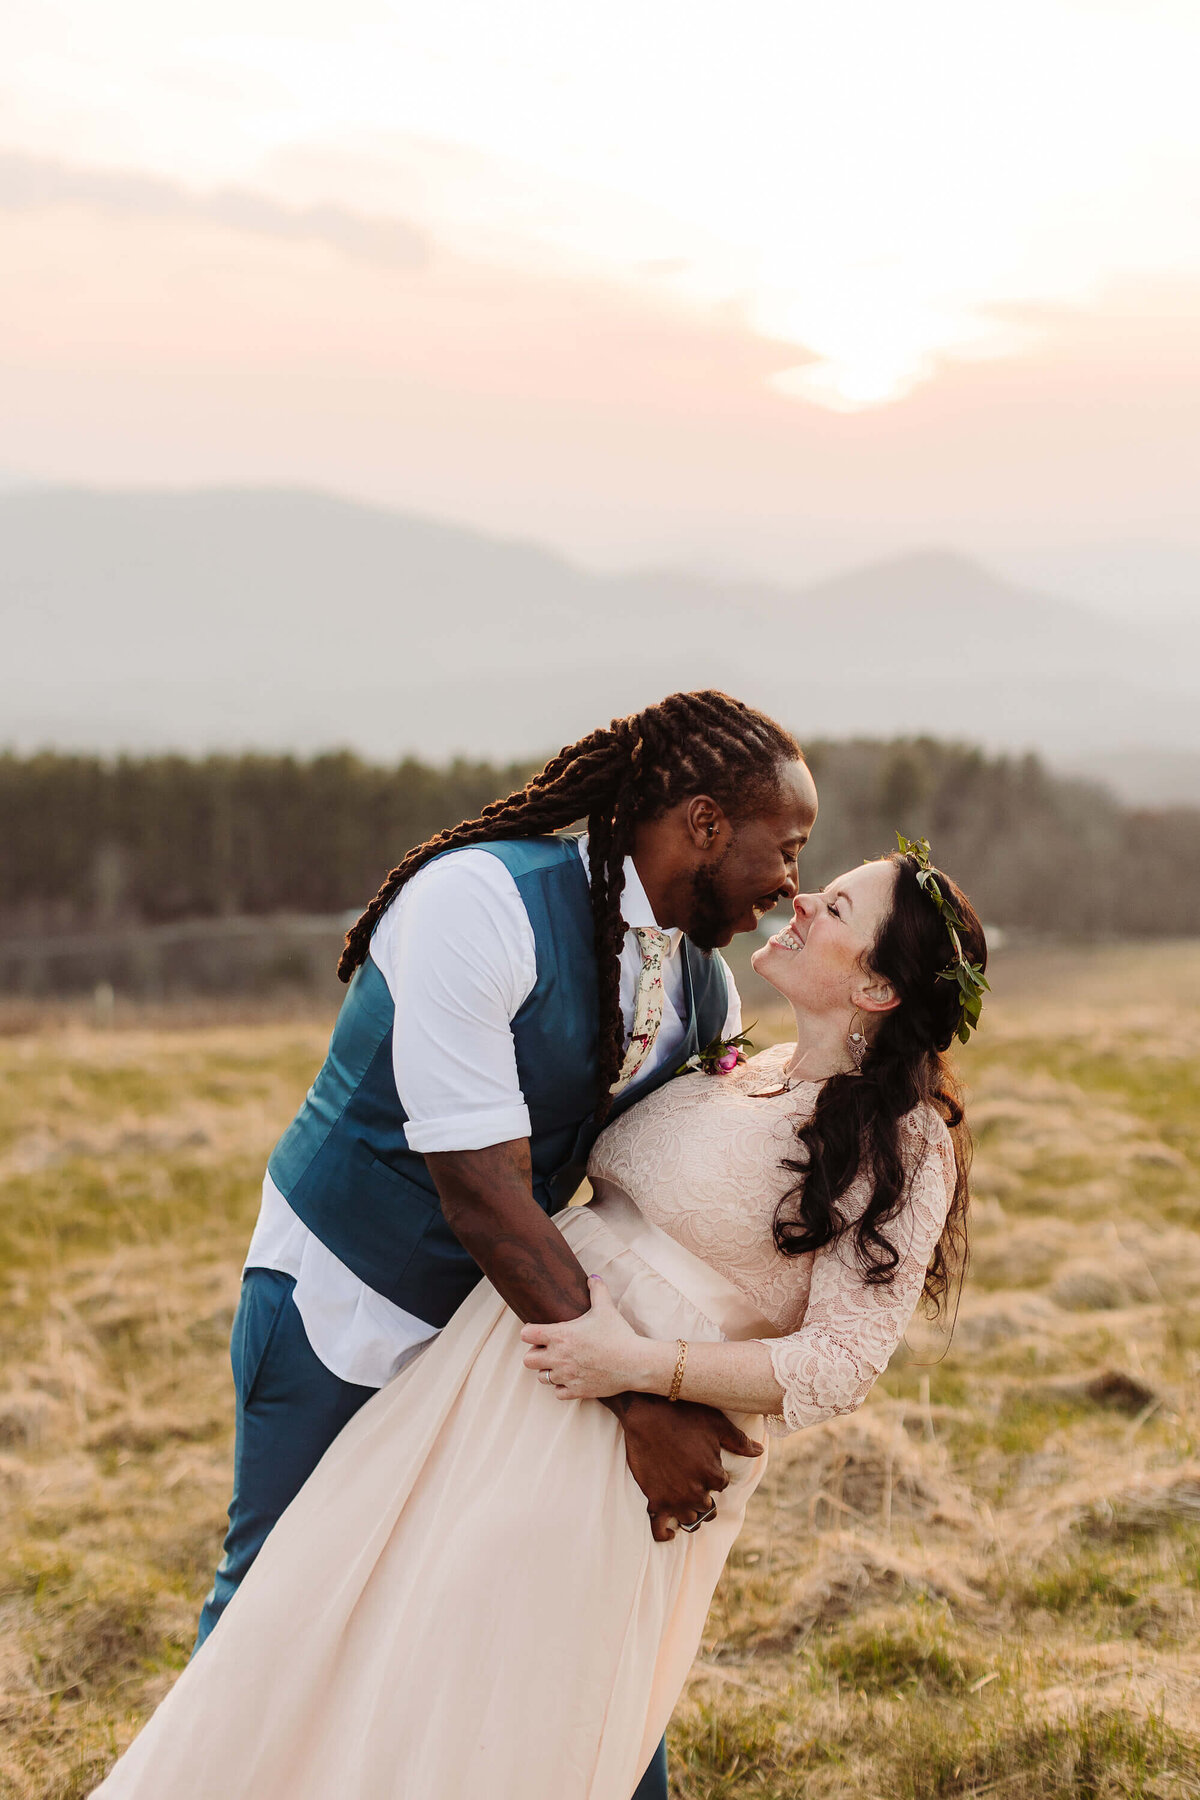 Max-Patch-Sunset-Mountain-Elopement-90